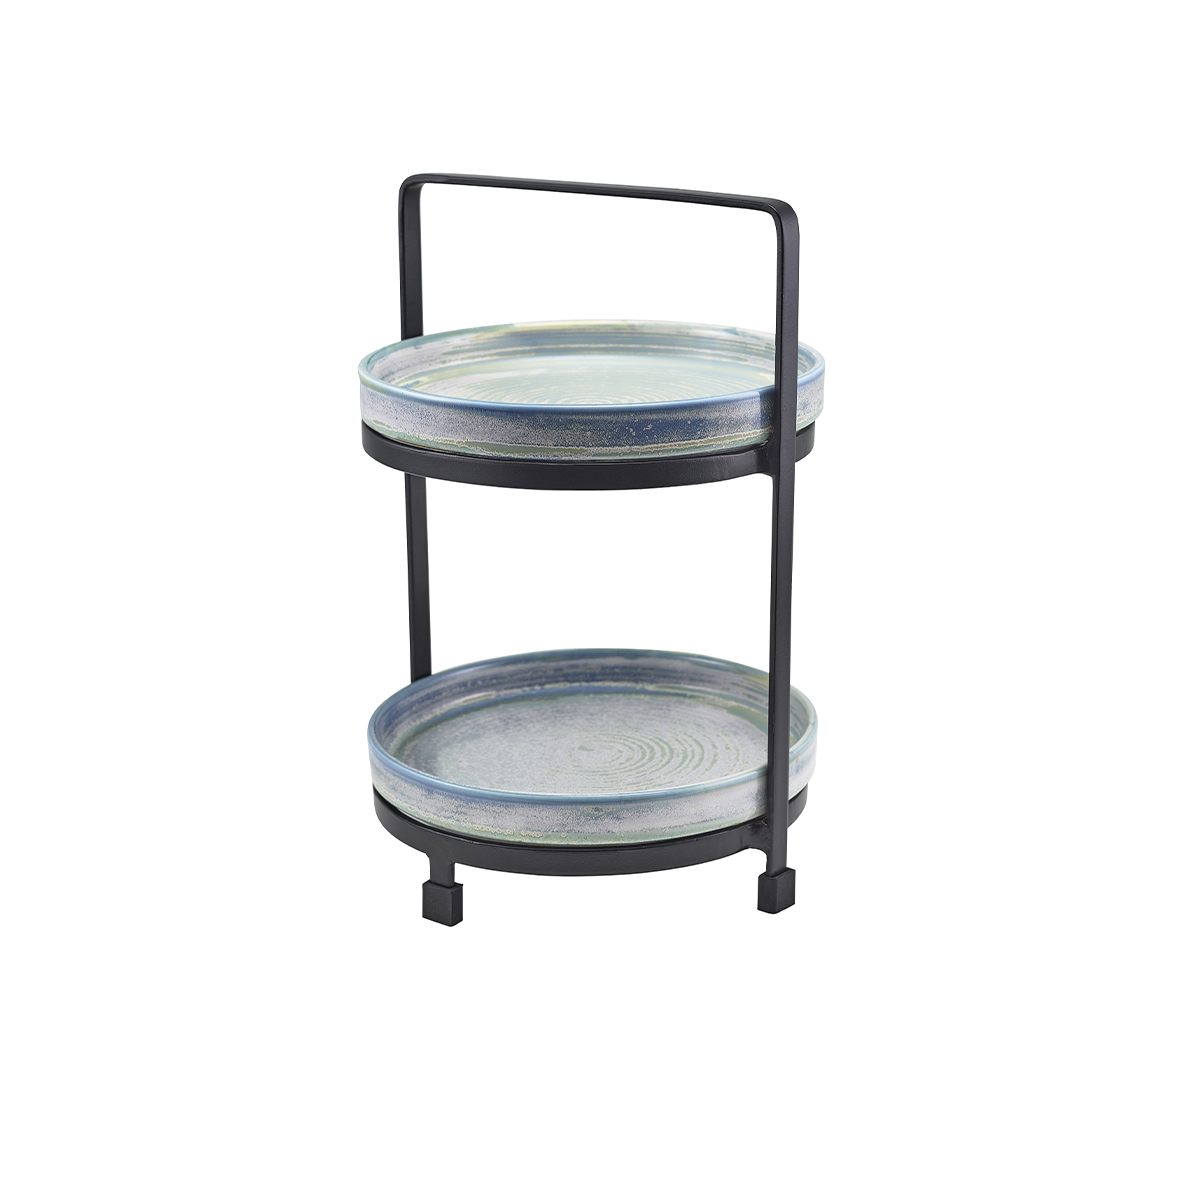 Two Tier Presentation Stand with Presentation Plates